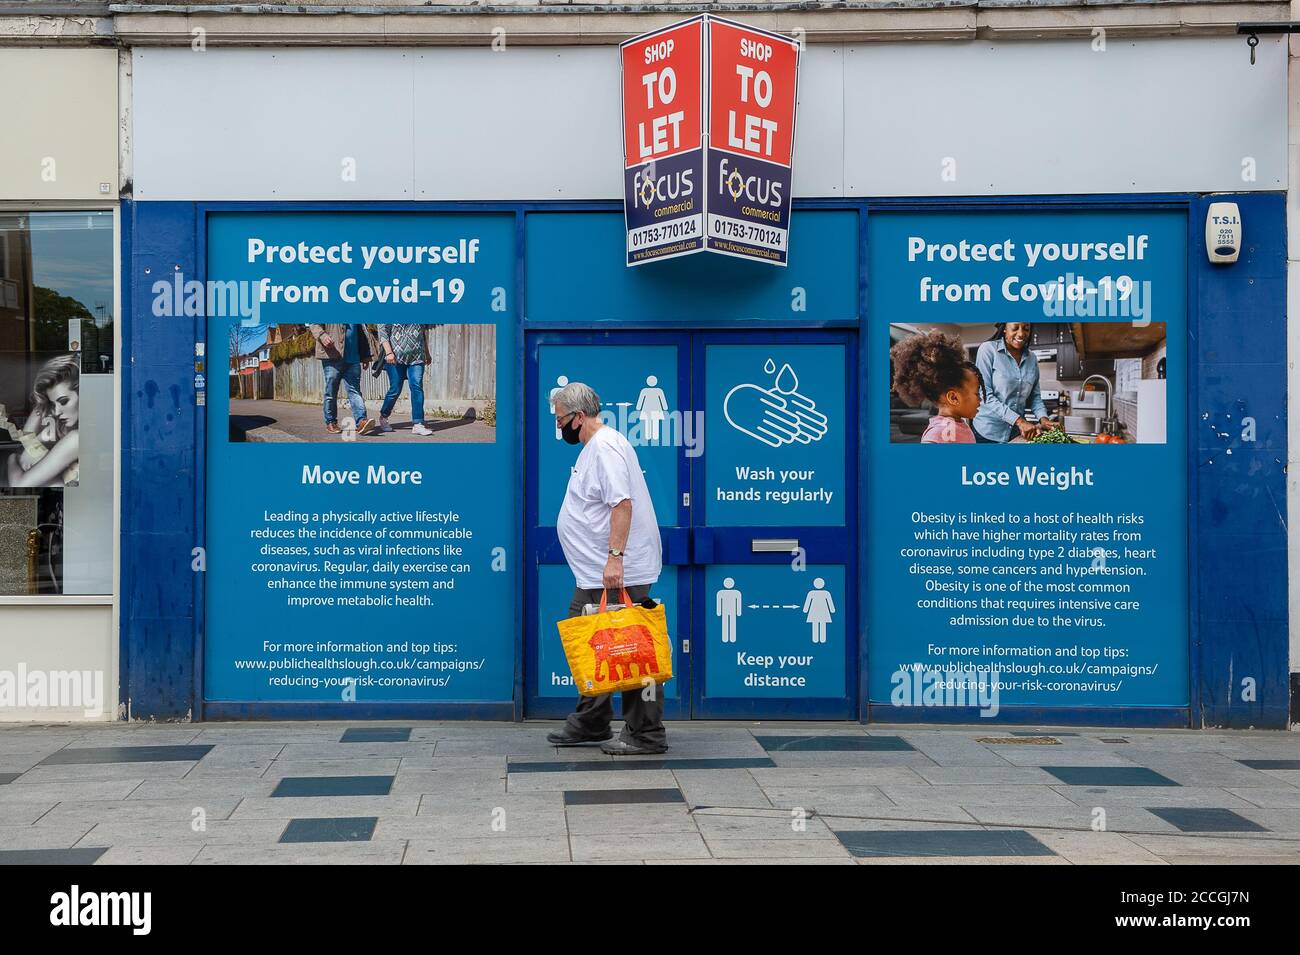 Slough, Berkshire, UK. 22nd August, 2020. A man walks past a public notice in Slough High Street reminding people to keep their weight in check. Slough in Berkshire has been named by Public Health England and the Department for Health and Social Care as a Covid-19 'area of concern' following a recent increase in the number of cases. Credit: Maureen McLean/Alamy Live News Stock Photo